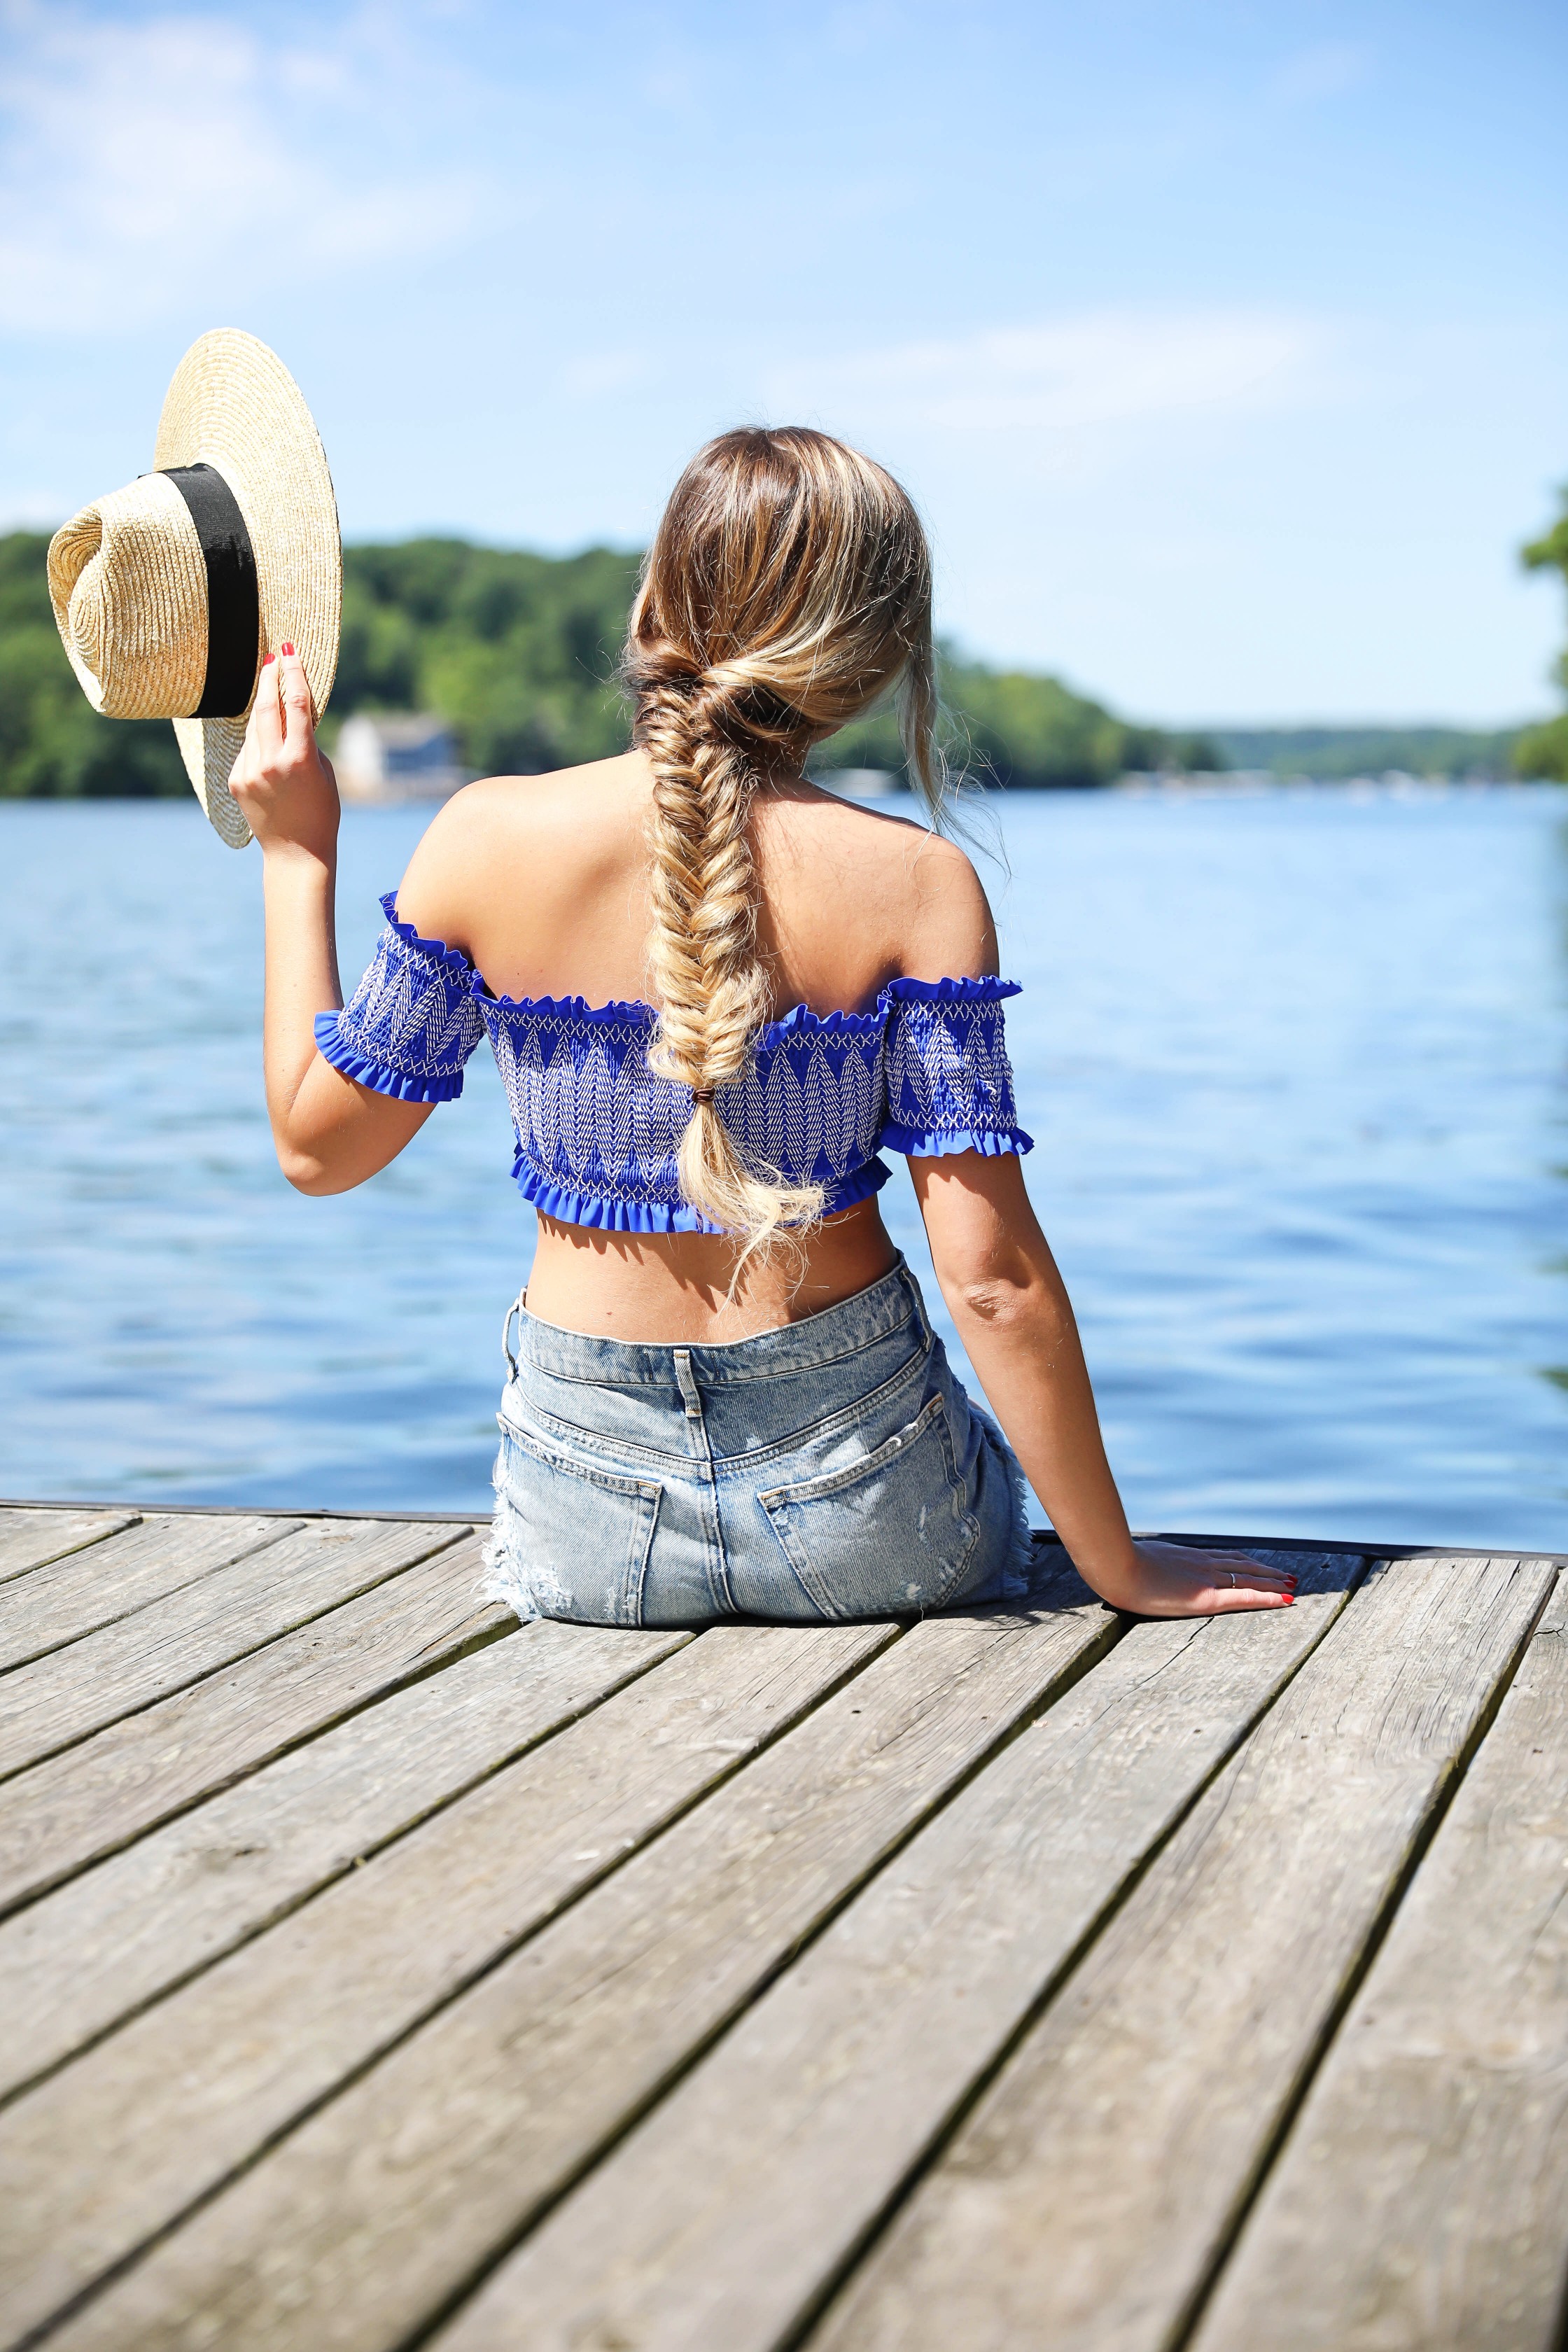 Hair care routine for summer! Royal blue Ted Baker London Smocked Bardot Bikini Top! I love this off the shoulder swimsuit, plus the colors is adorable! Paired with jean shorts at the lake! Perfect summer outfit! Details on fashion blog daily dose of charm by lauren lindmark